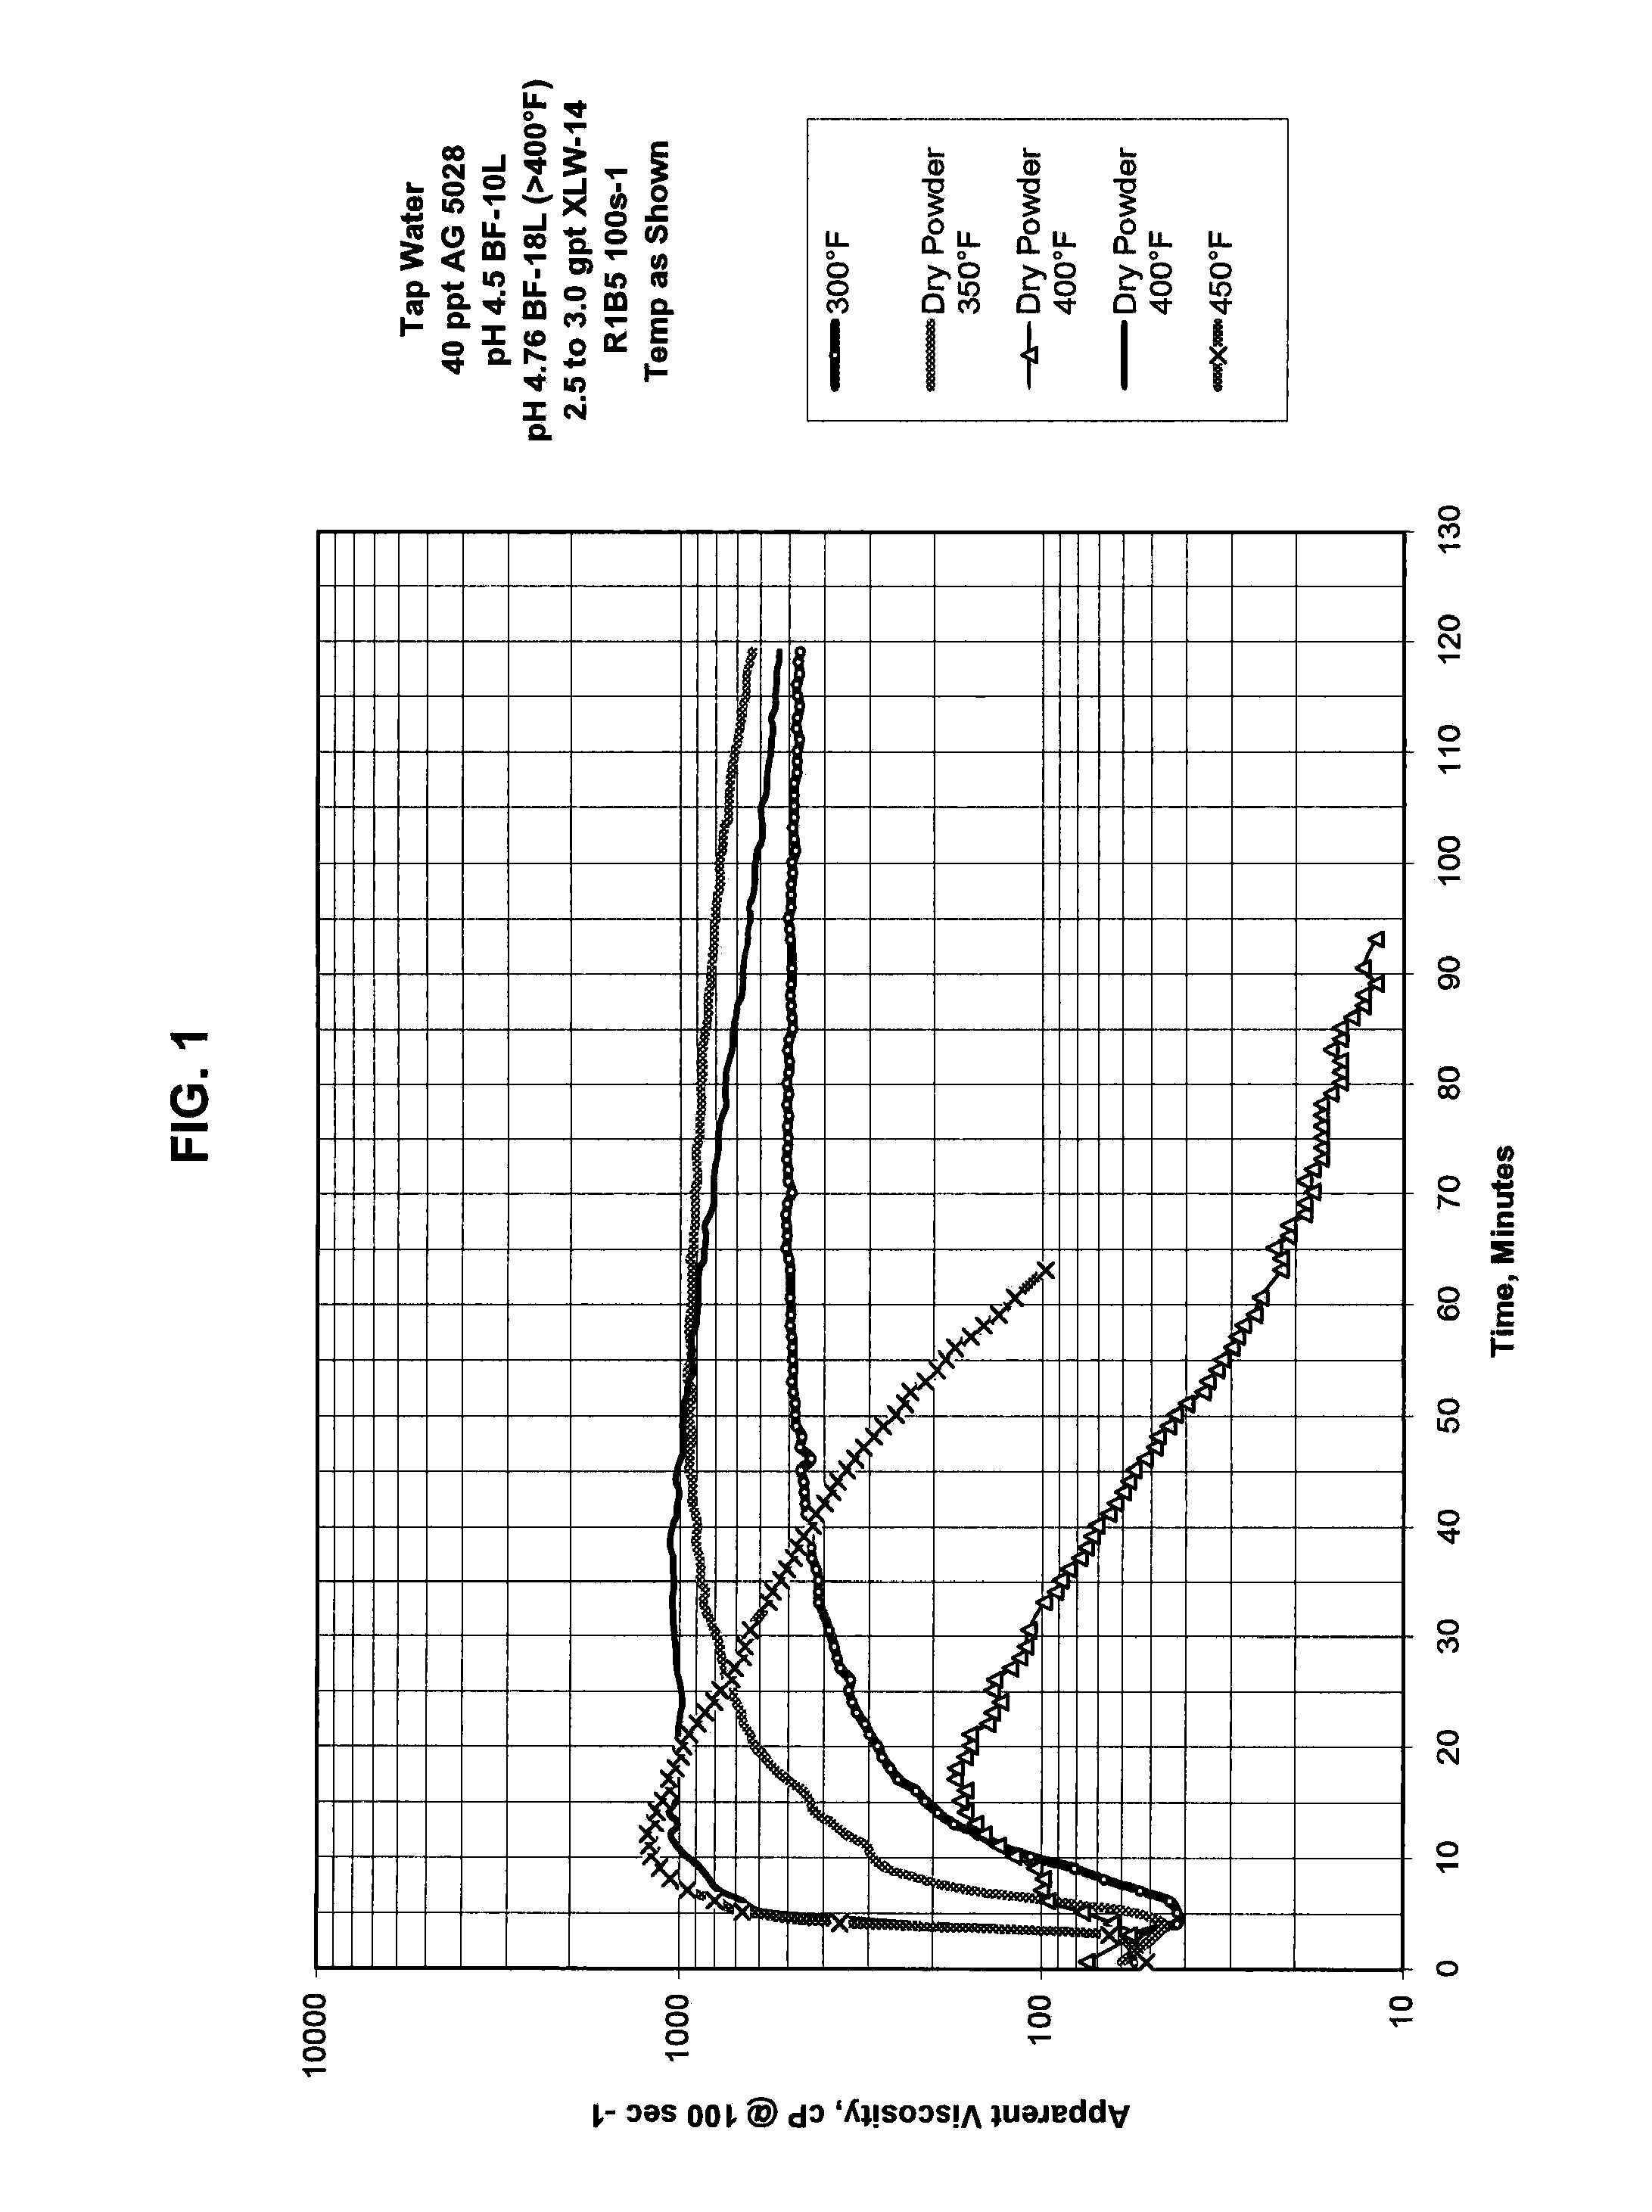 Method of fracturing with phenothiazine stabilizer